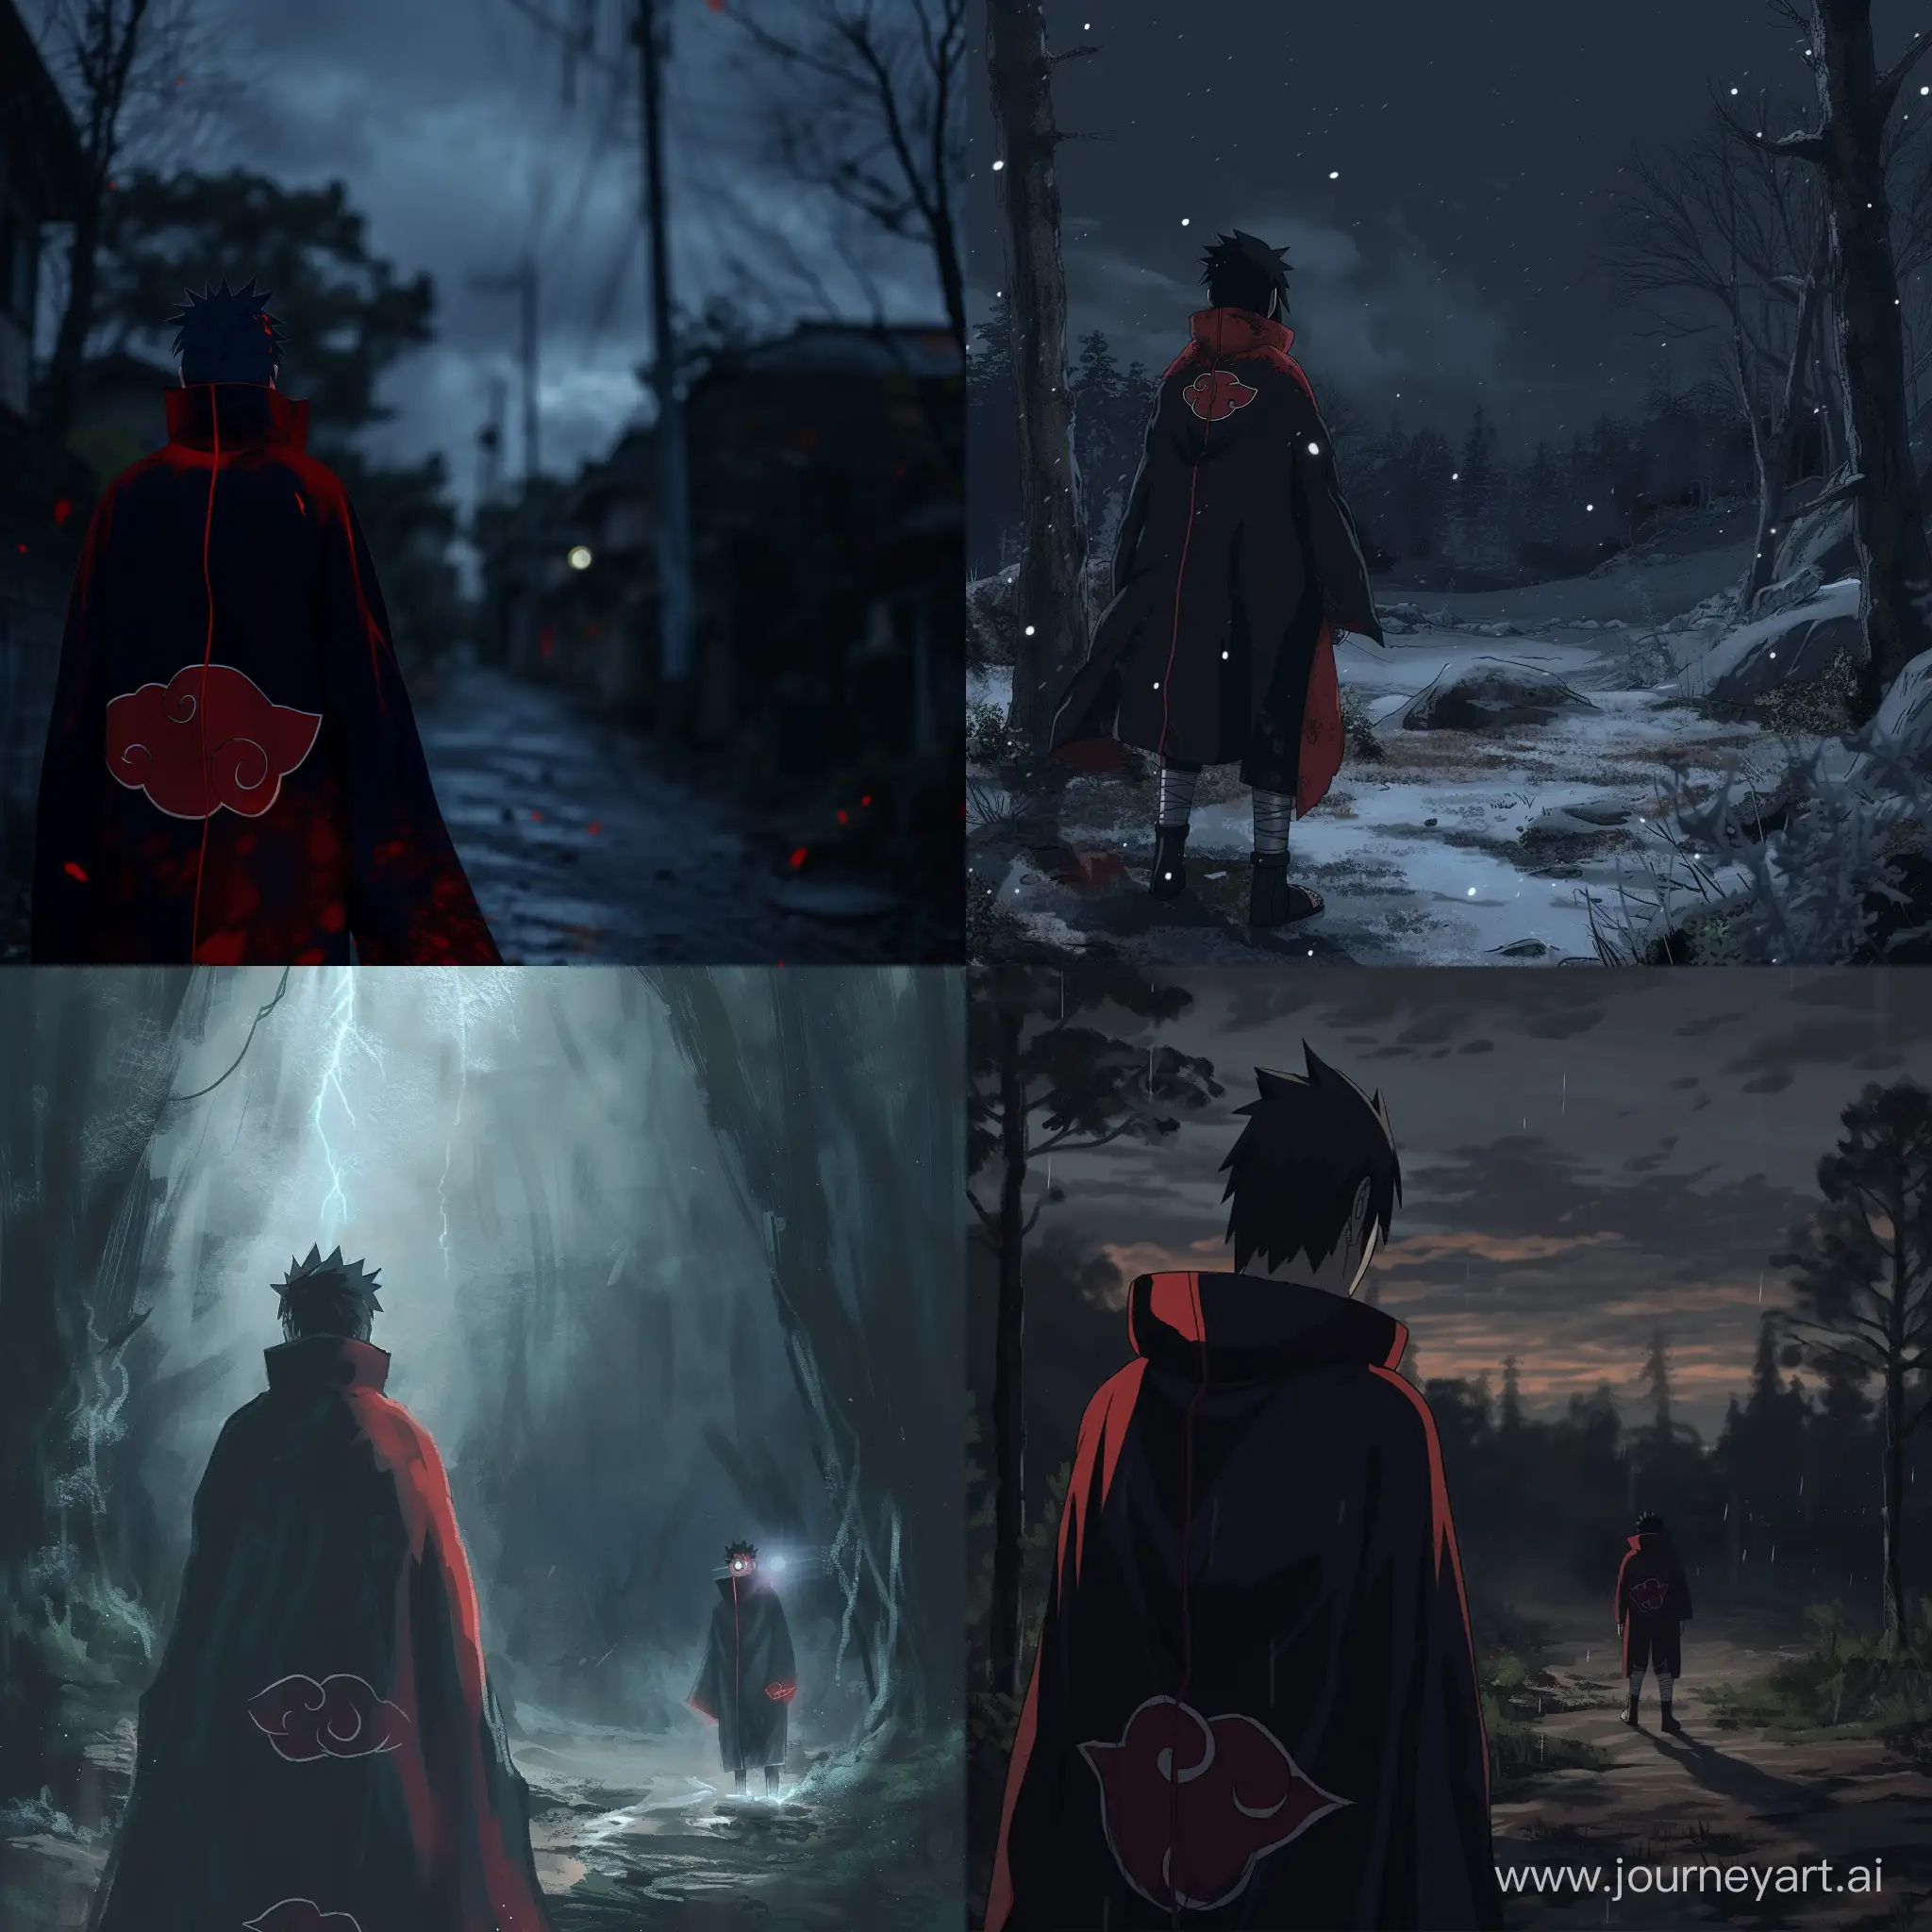 Watching  Hiroshi Uchiha stands from the outskirts are a man in a red and black cloack with rinnegan shineing through the darkness